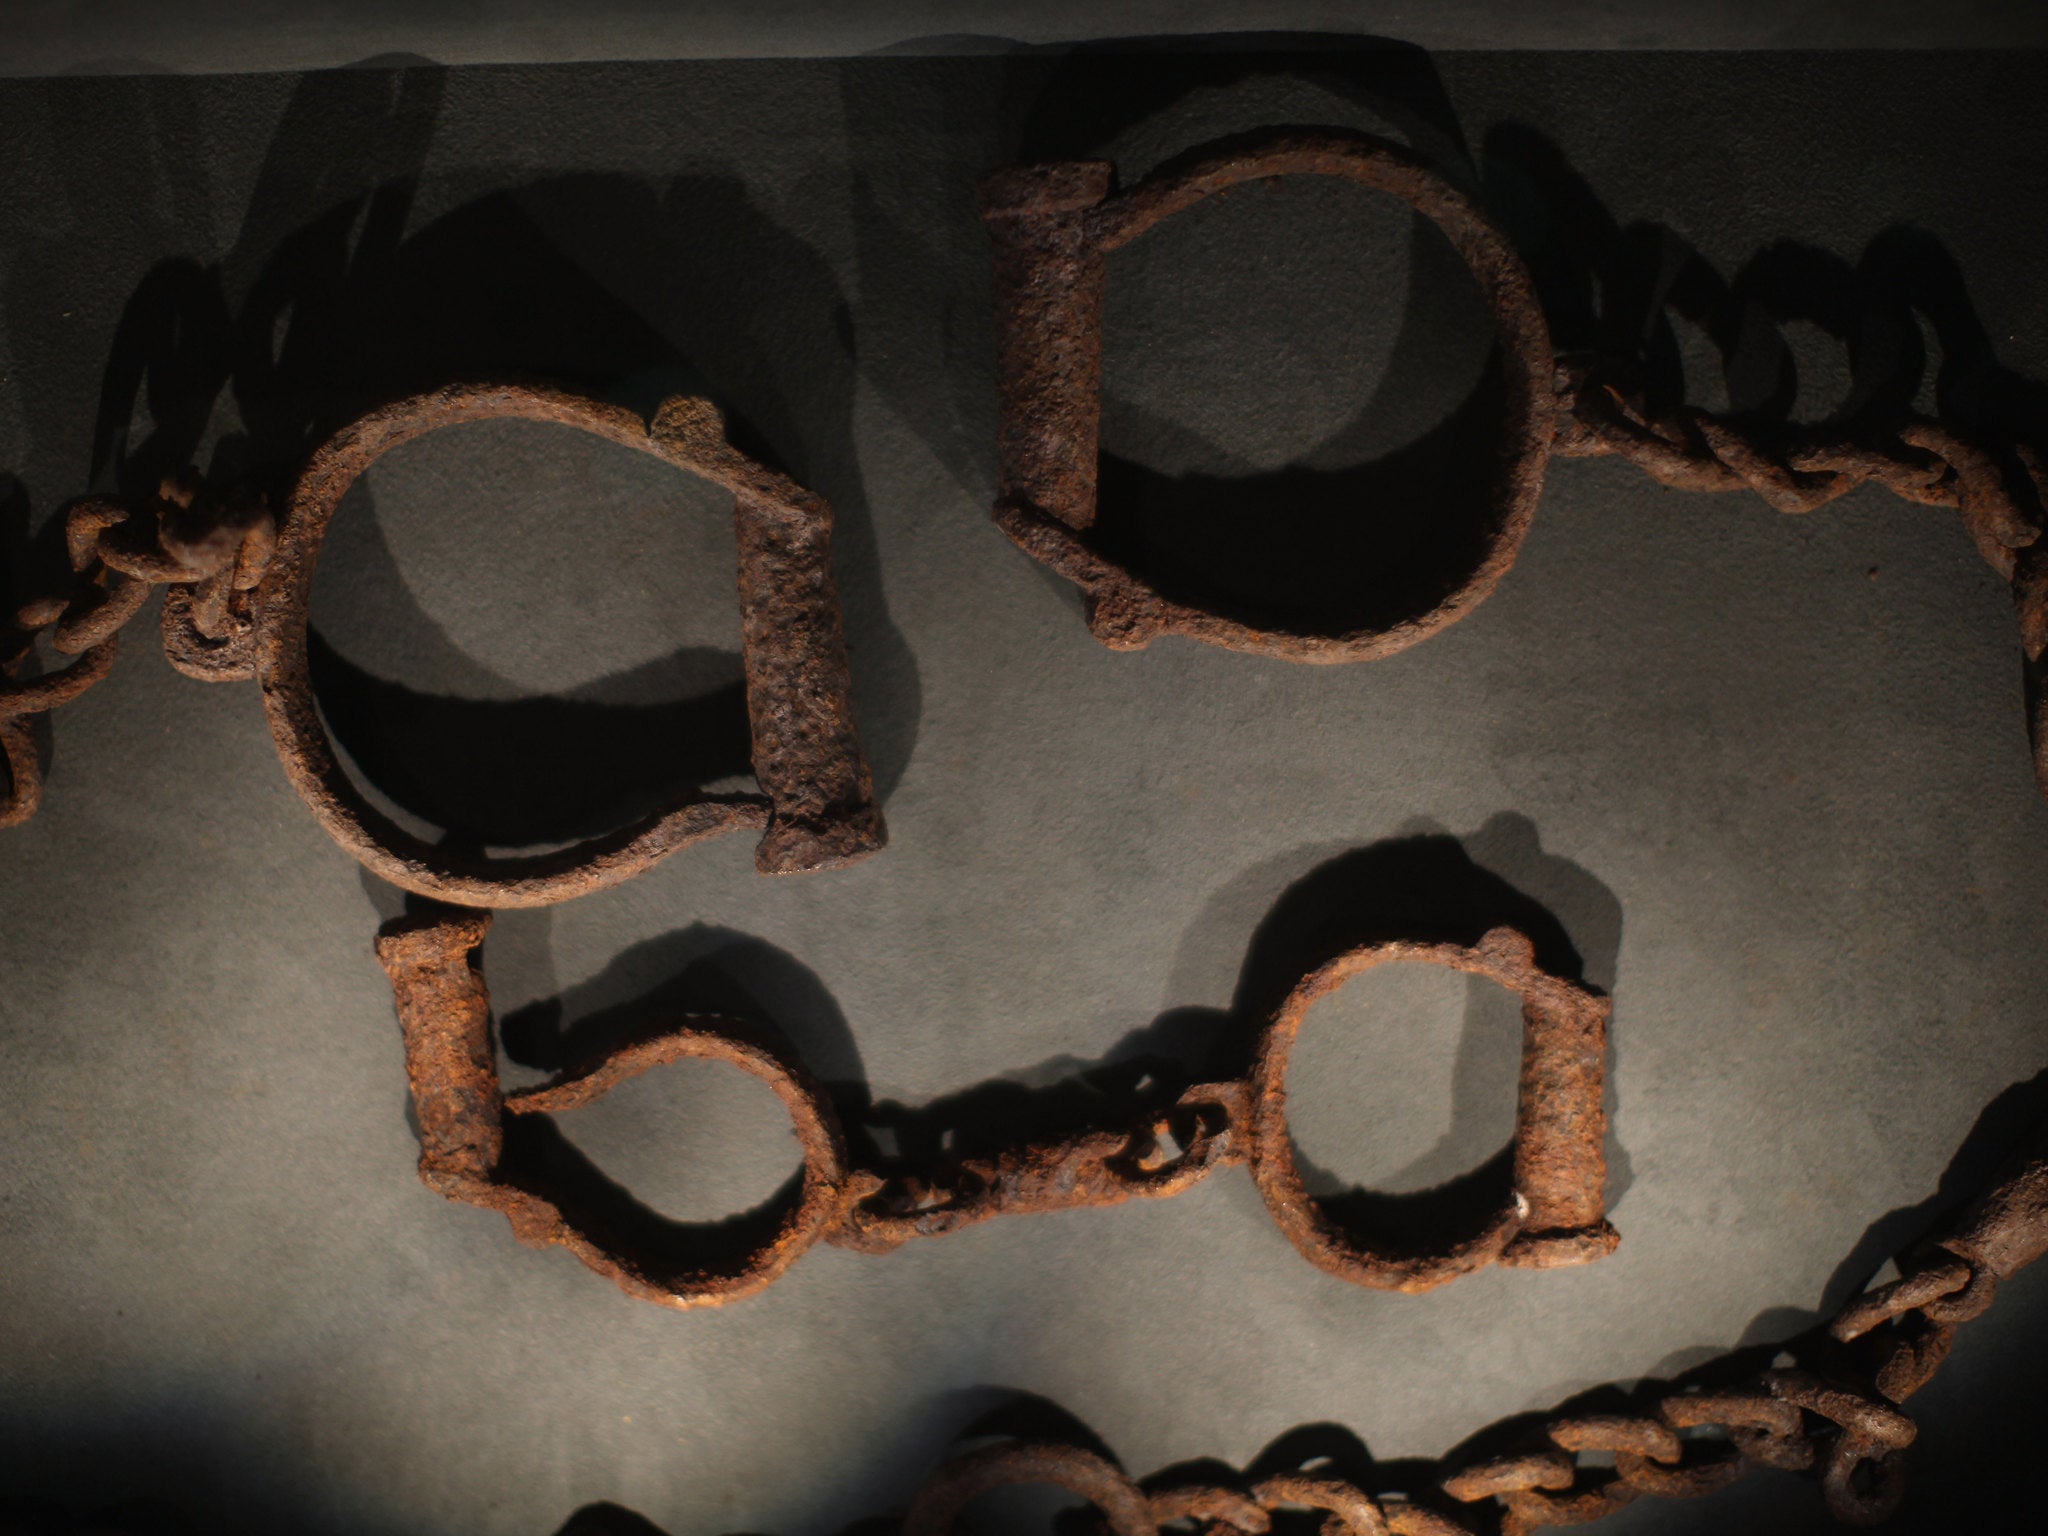 LIVERPOOL, ENGLAND - FEBRUARY 09: Shackles which were used to tether slaves on display at the International Slavery Museum on February 9, 2012 in Liverpool, England. The maritime city of Liverpool has seven museums of national importance which include the